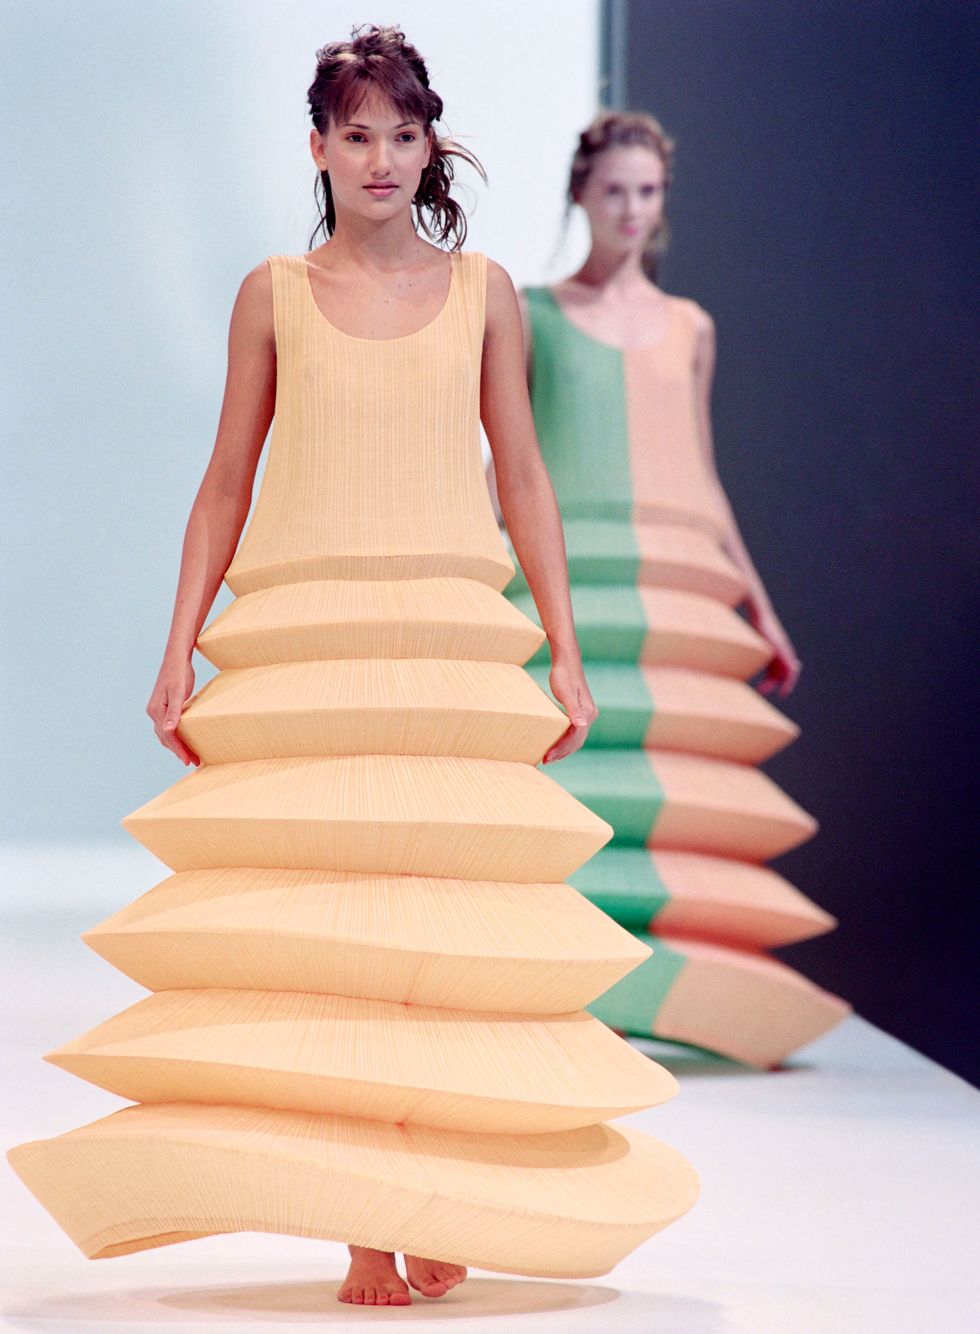 PLEATS PLEASE ISSEY MIYAKE 30th Anniversary Campaign